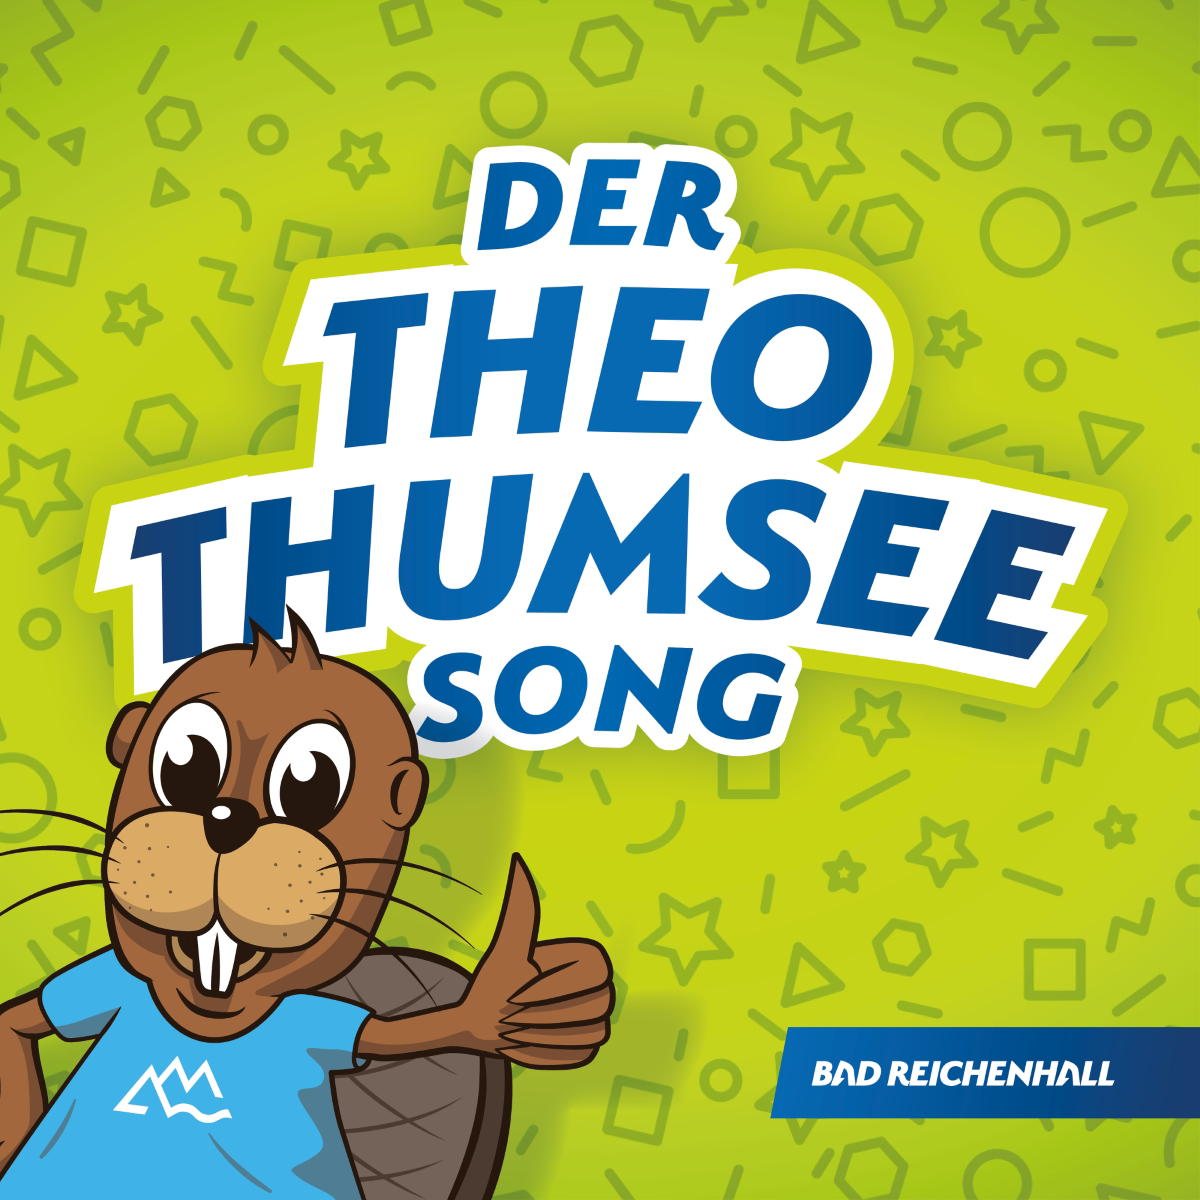 Theo Thumsee Song